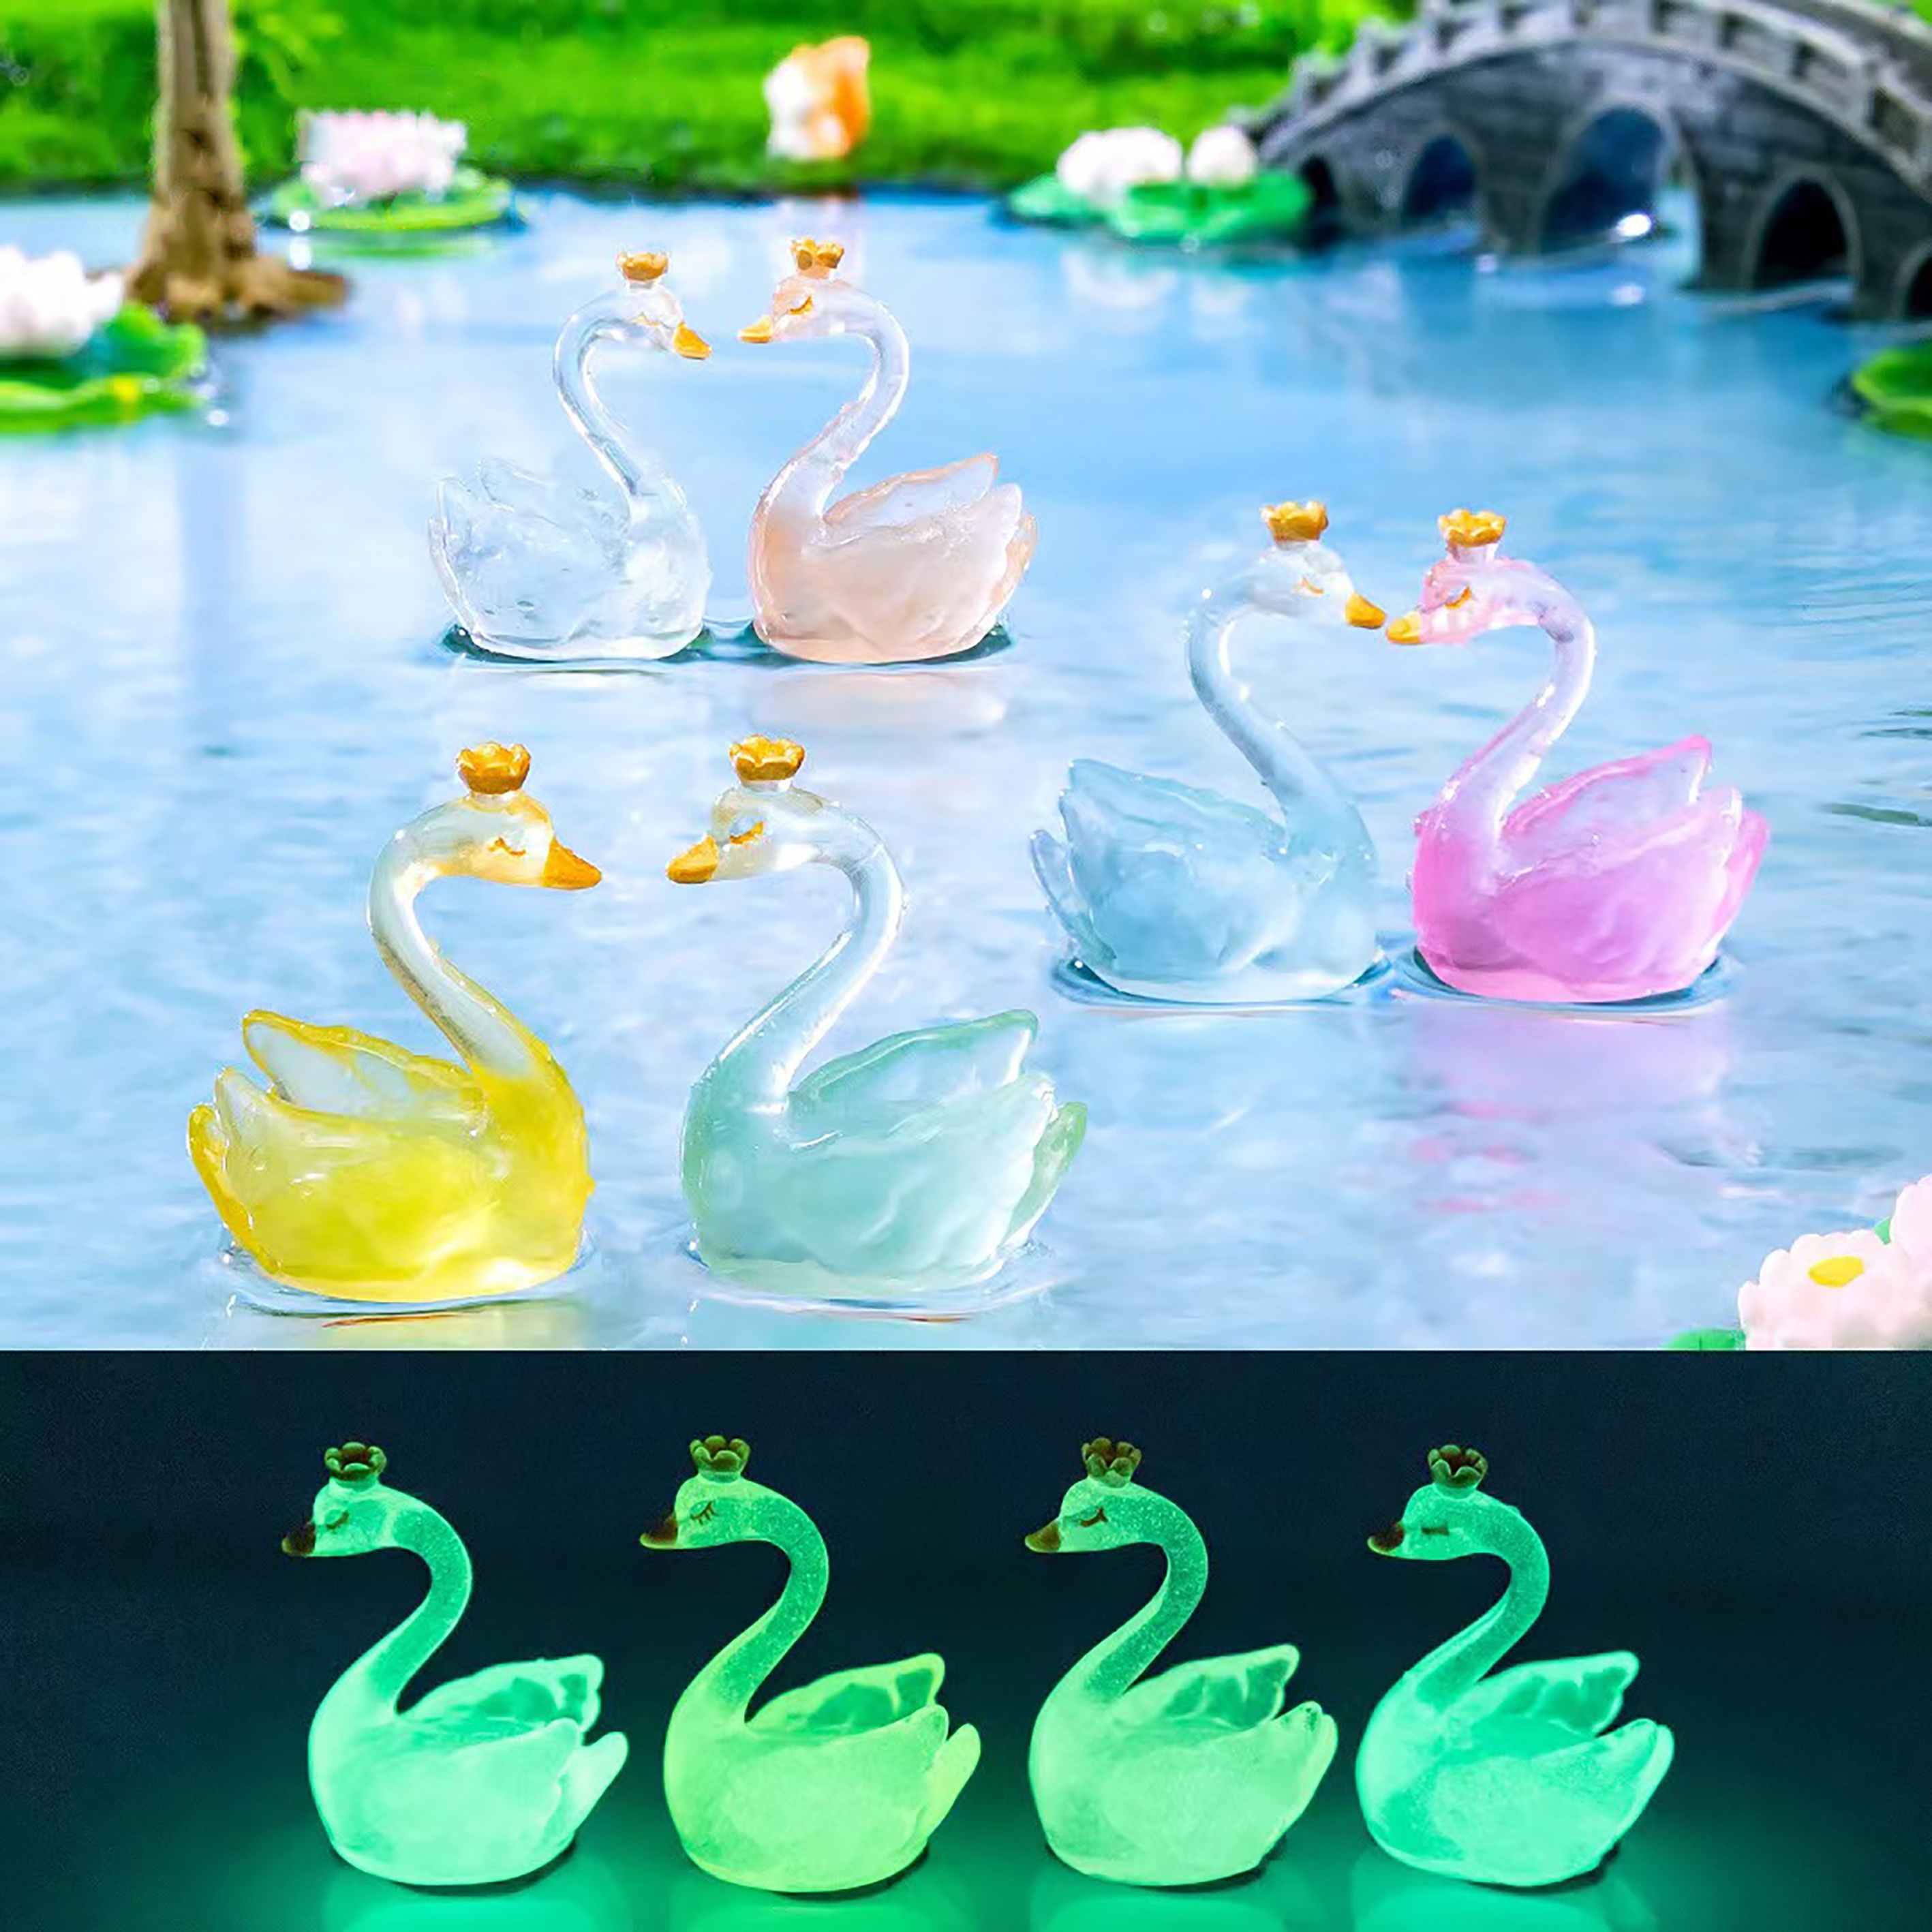 

6-piece Glow-in-the-dark Crown Swan Statues - Vibrant Resin Garden Ornaments For Ponds & Aquariums, Adds A Touch Of Magic To Your Space